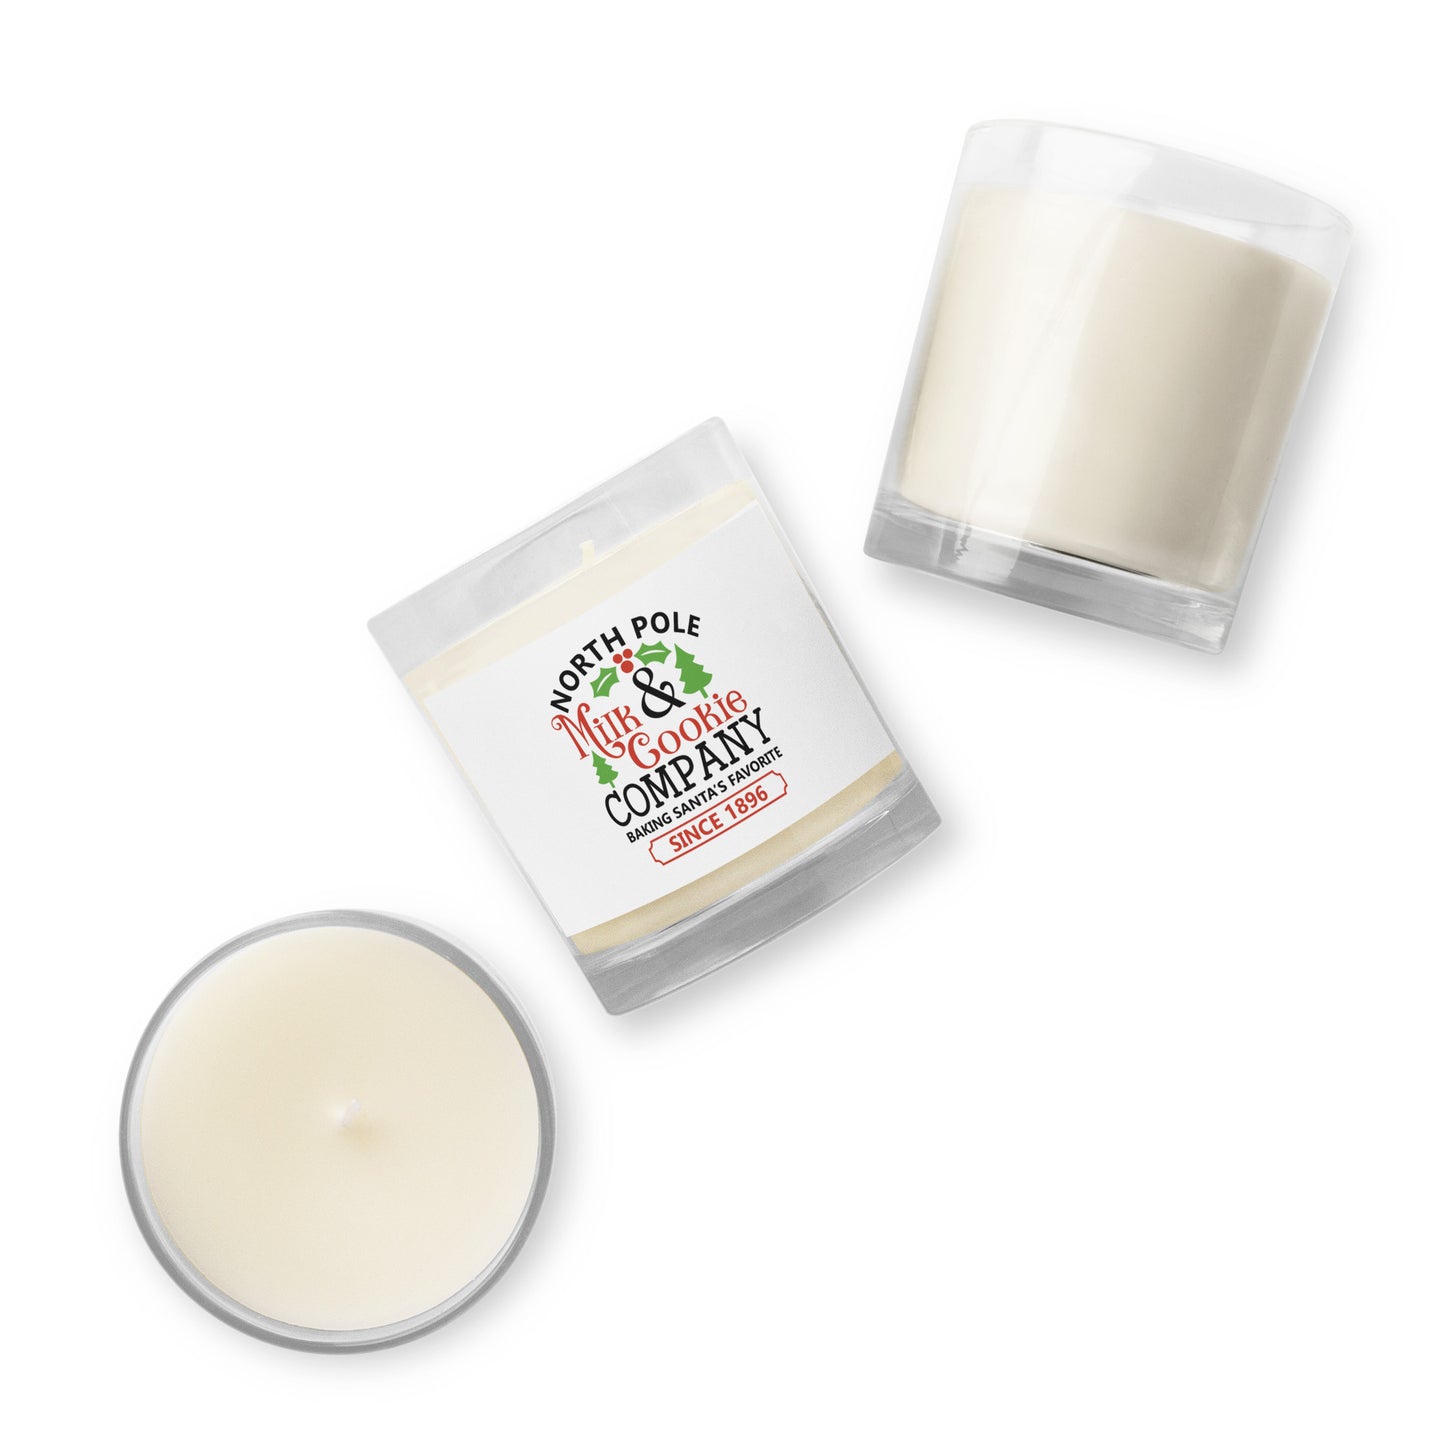 North Pole Milk & Cookie Co. Glass Jar Soy Wax Candle